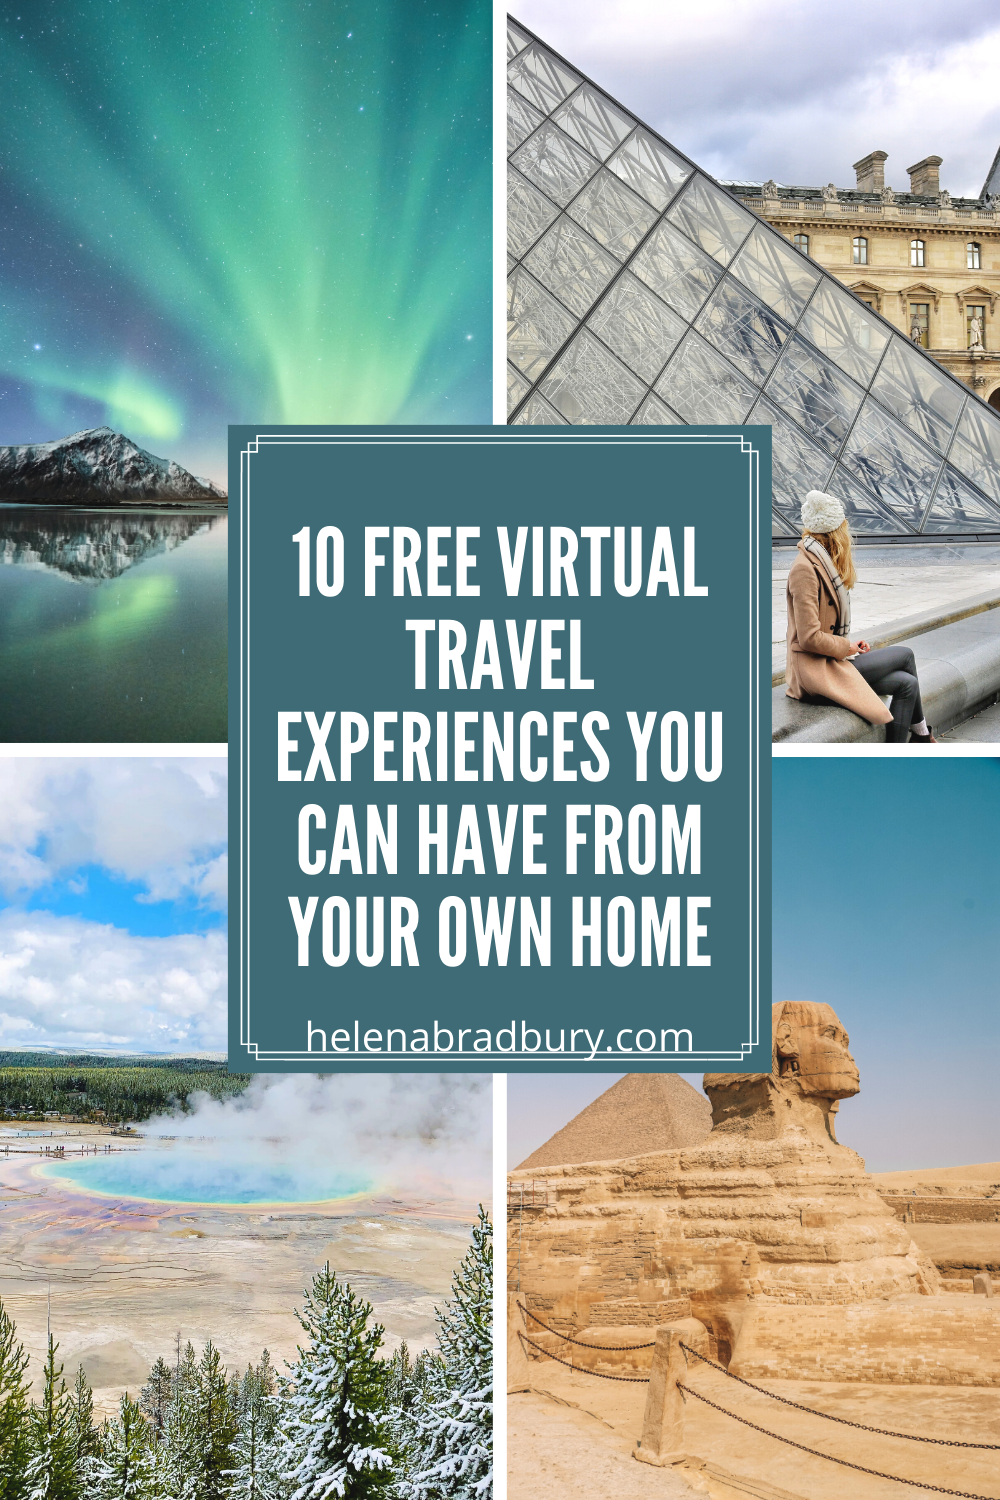 10 Free virtual travel experiences you can have from your own home, for whatever reason you’re stuck at home here are 10 free travel experiences you can have from your own home | Helena Bradbury travel blog | virtual travel tours | virtual museum to…